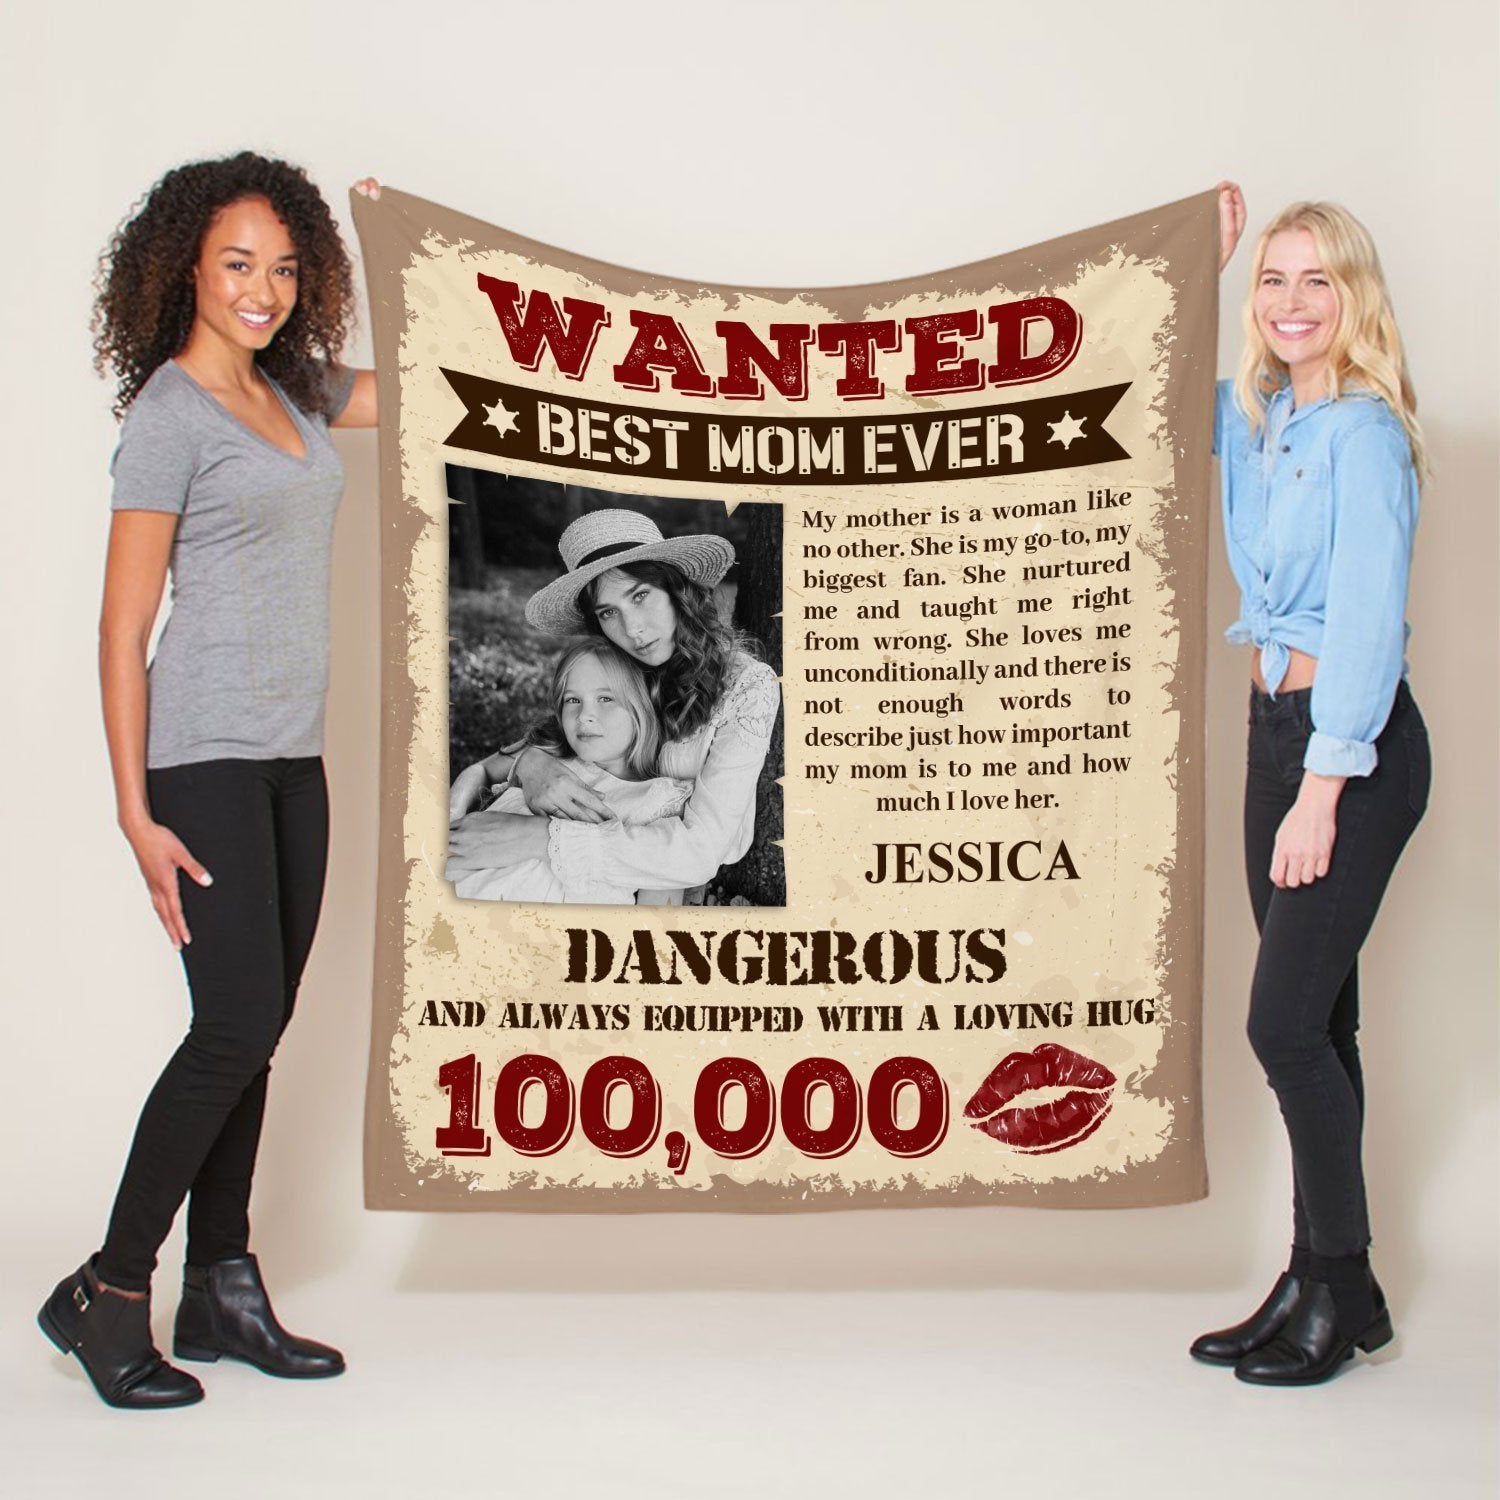 Best Mom Ever, Dangerous And Always Equipped With A Loving Hug, Custom Photo Blanket